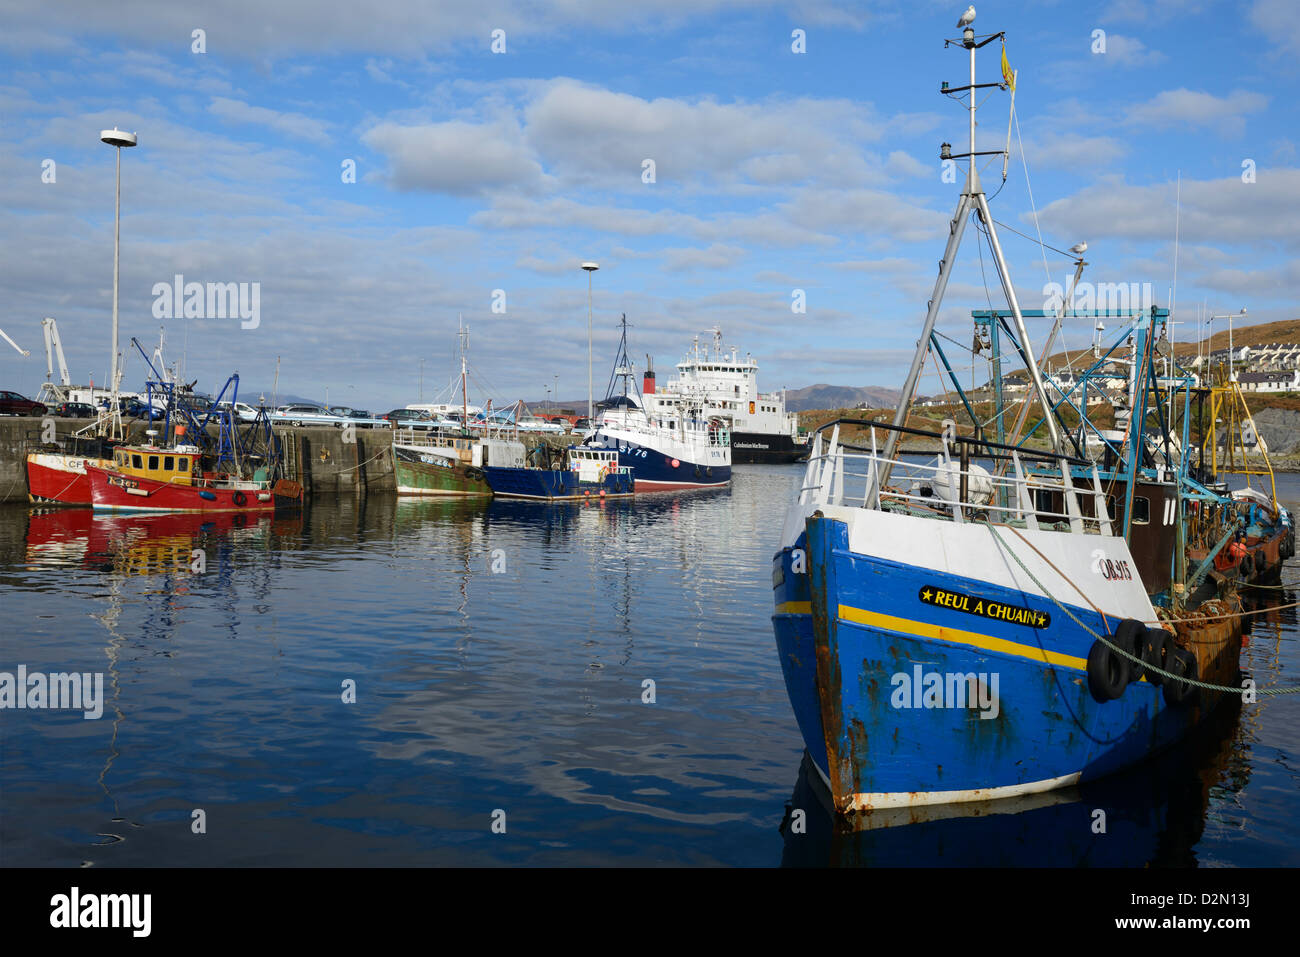 Fishing boats in the harbour, Mallaig, Highlands, Scotland, United Kingdom, Europe Stock Photo